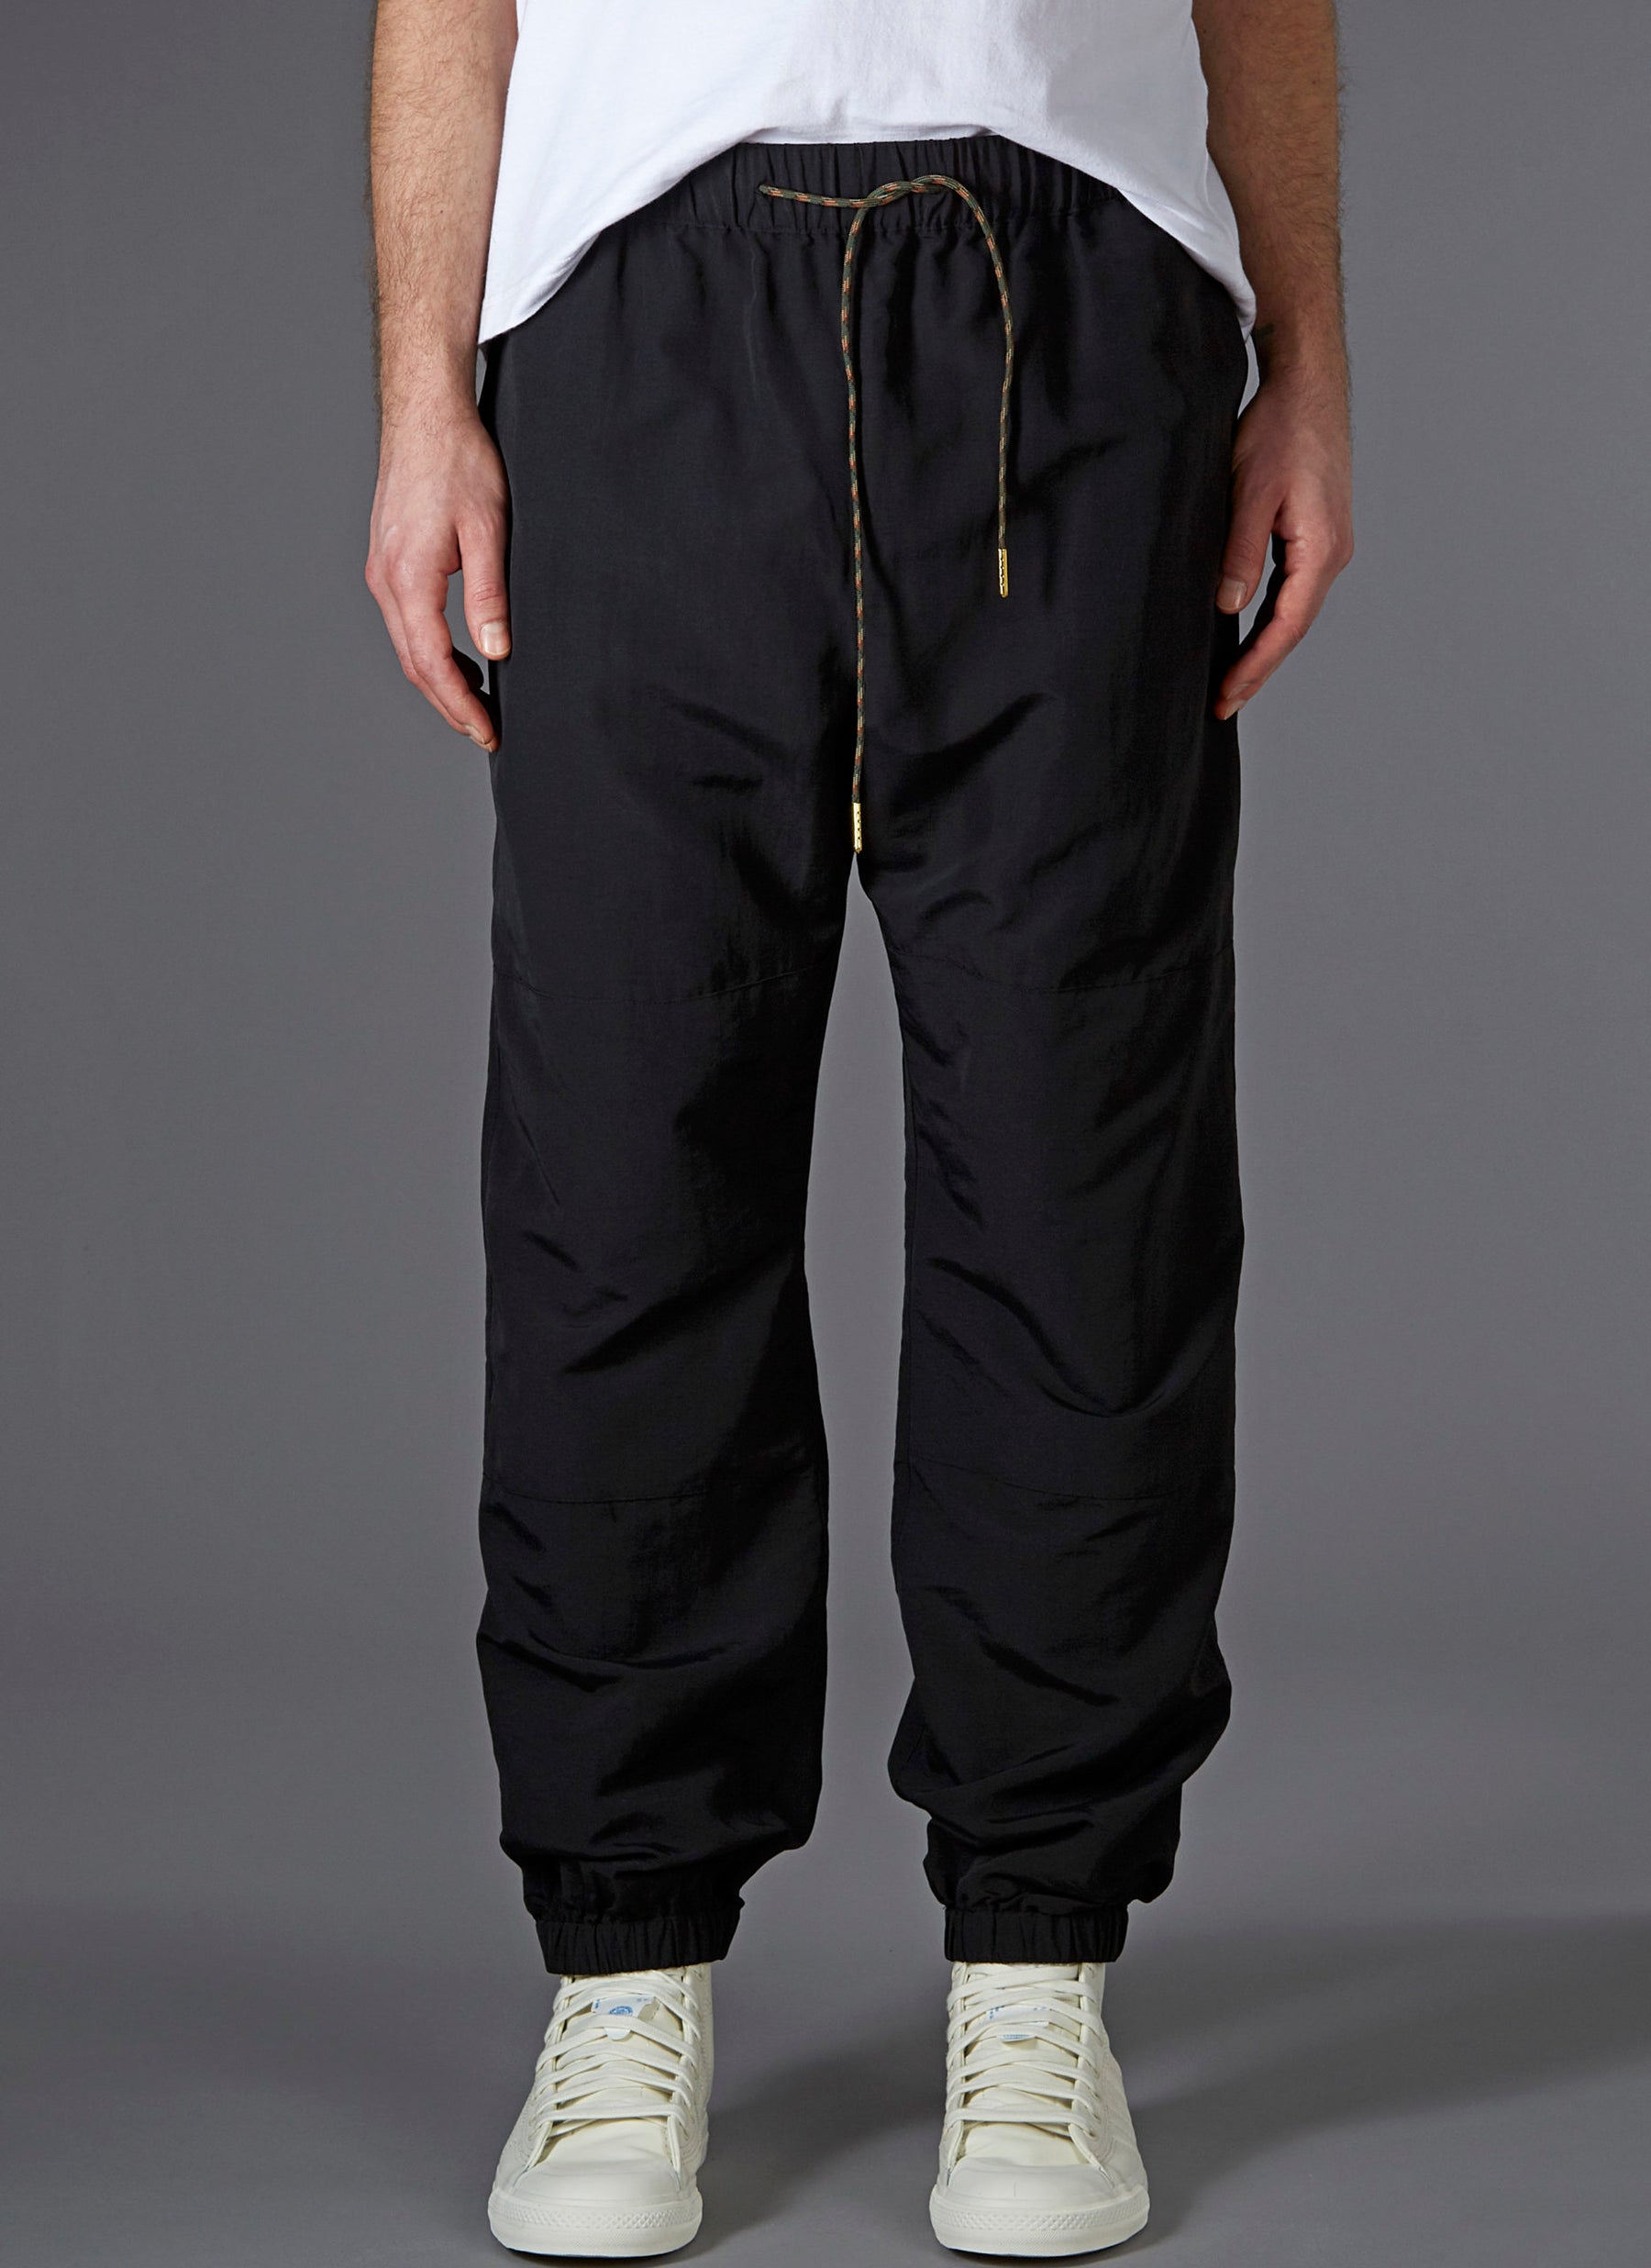 <span style="color: #ff2a00;">Last One</span> GREI. / TRACK PANTS